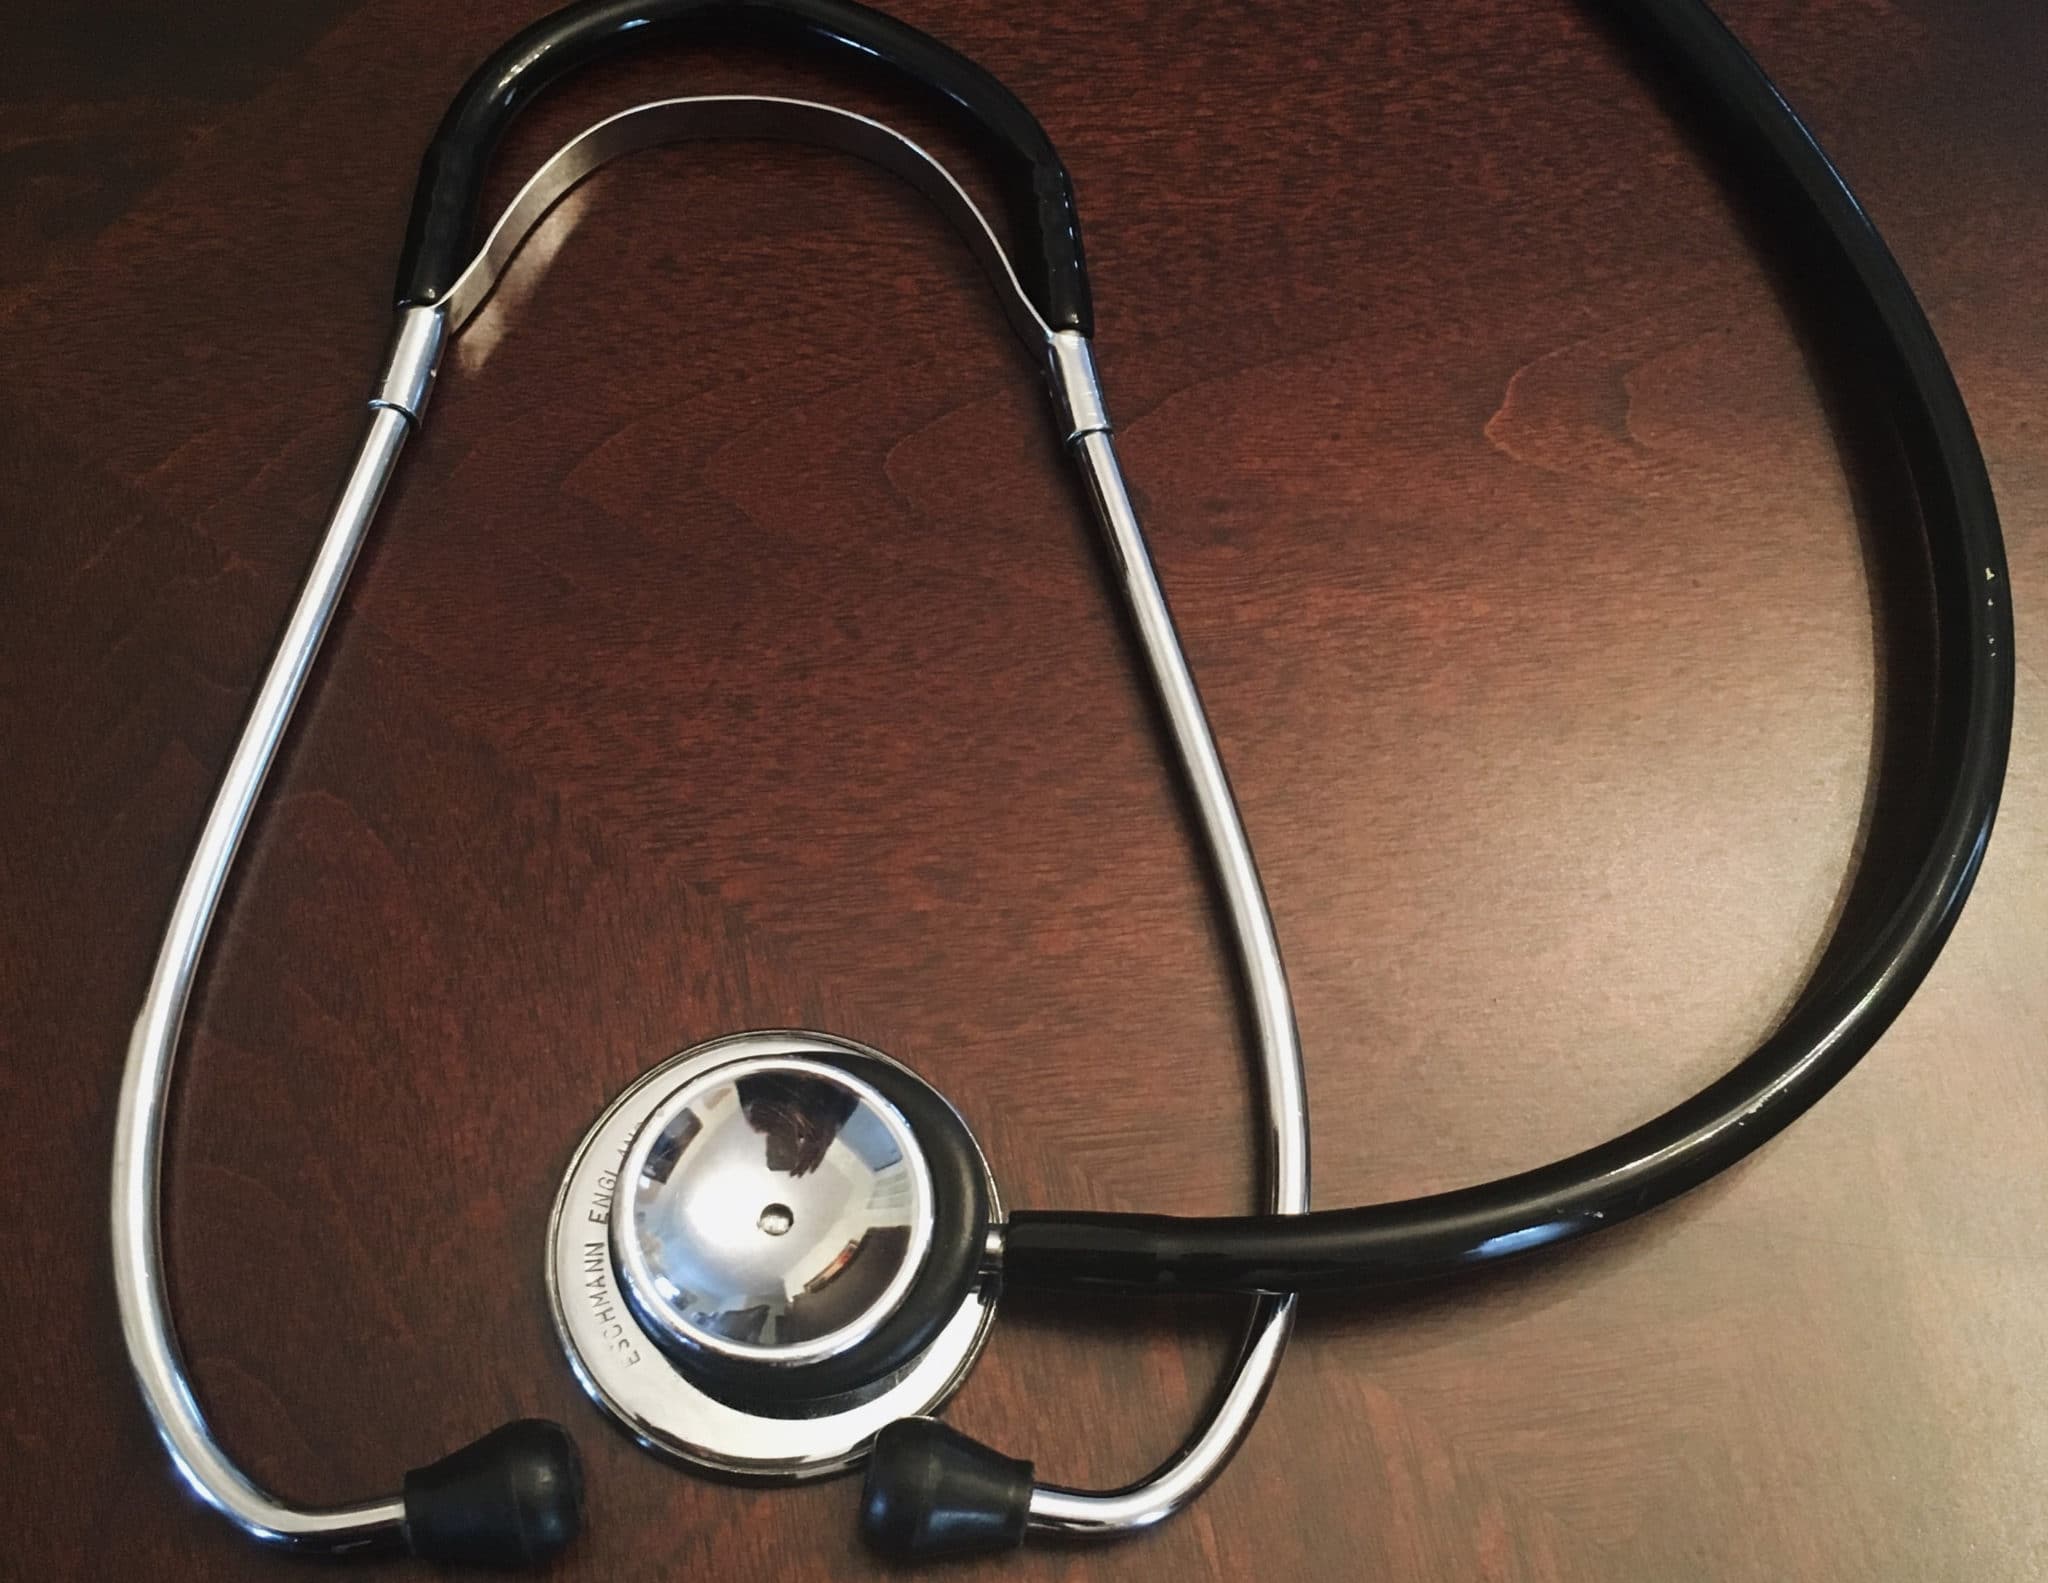 photo of a stethoscope